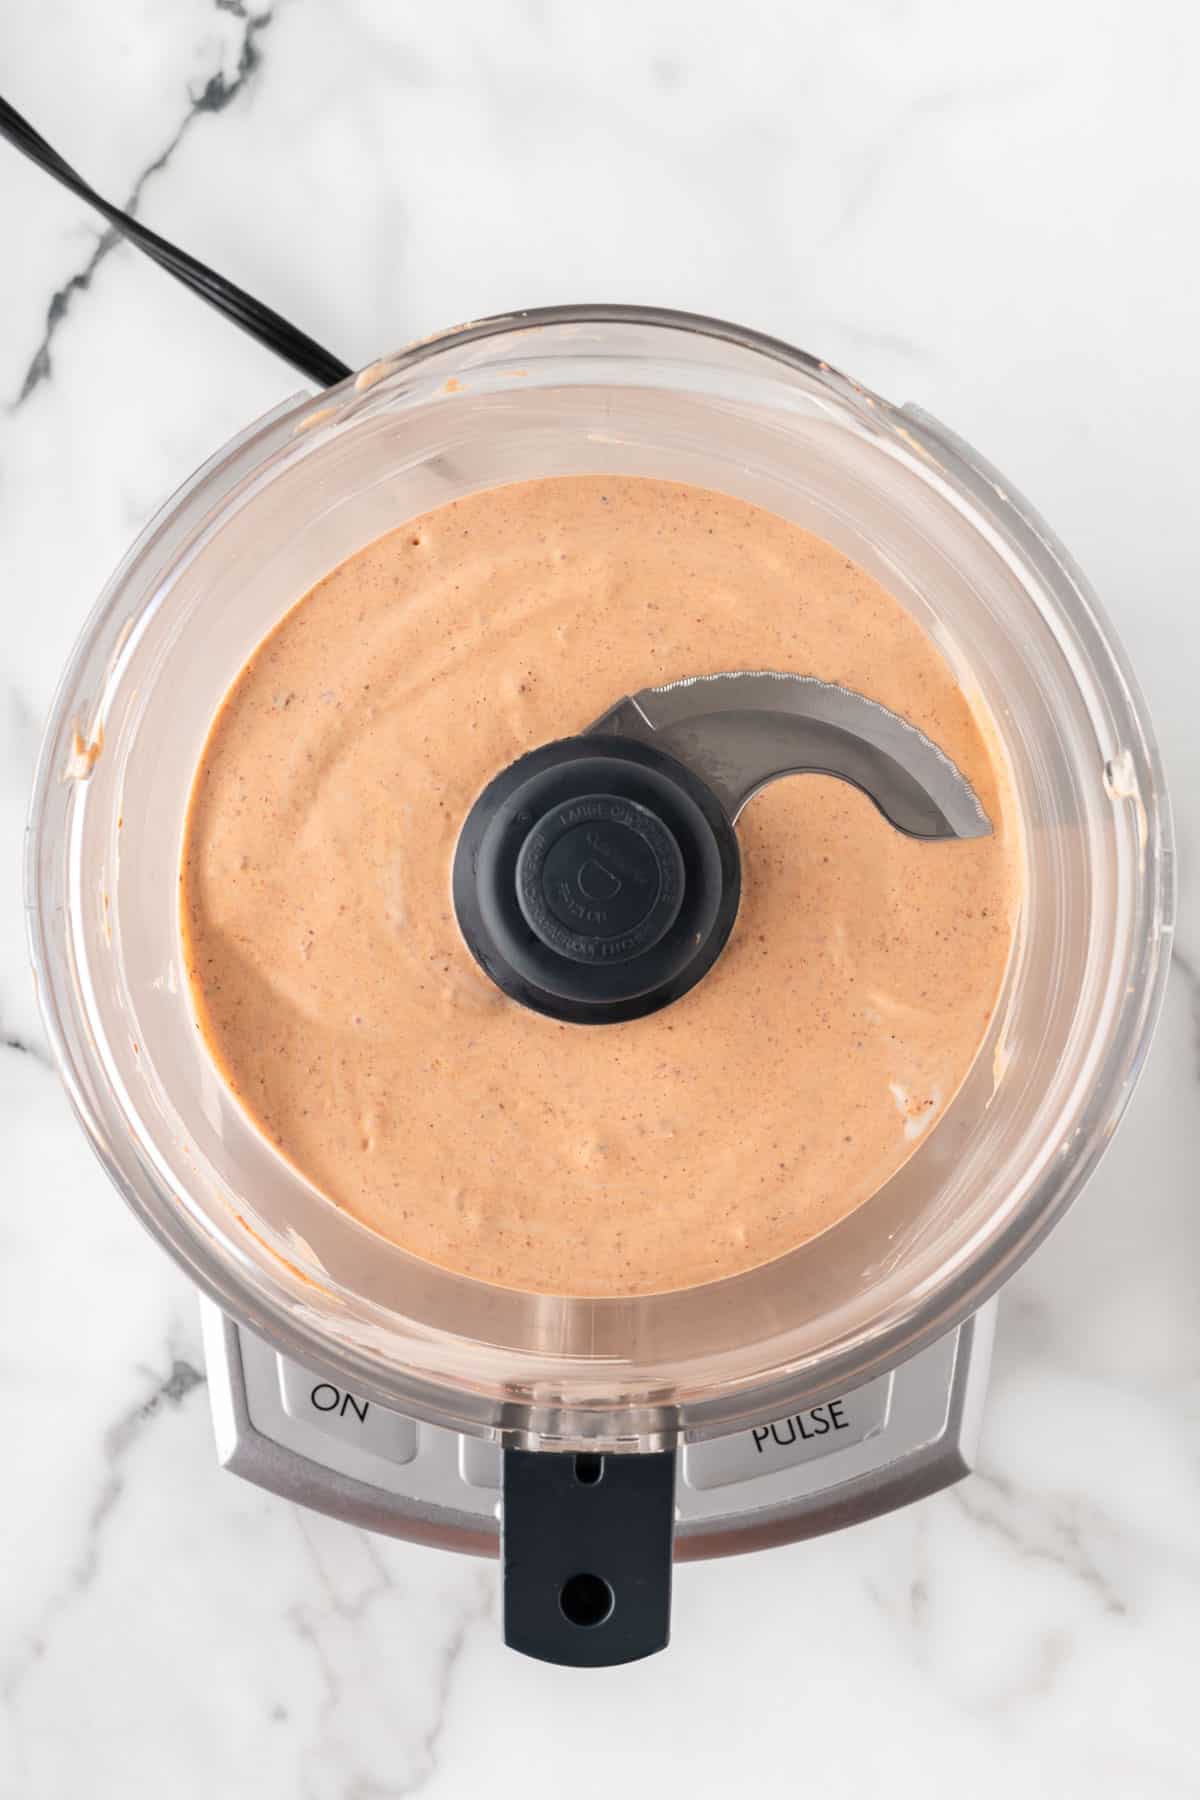 chipotle ranch dressing in a food processor